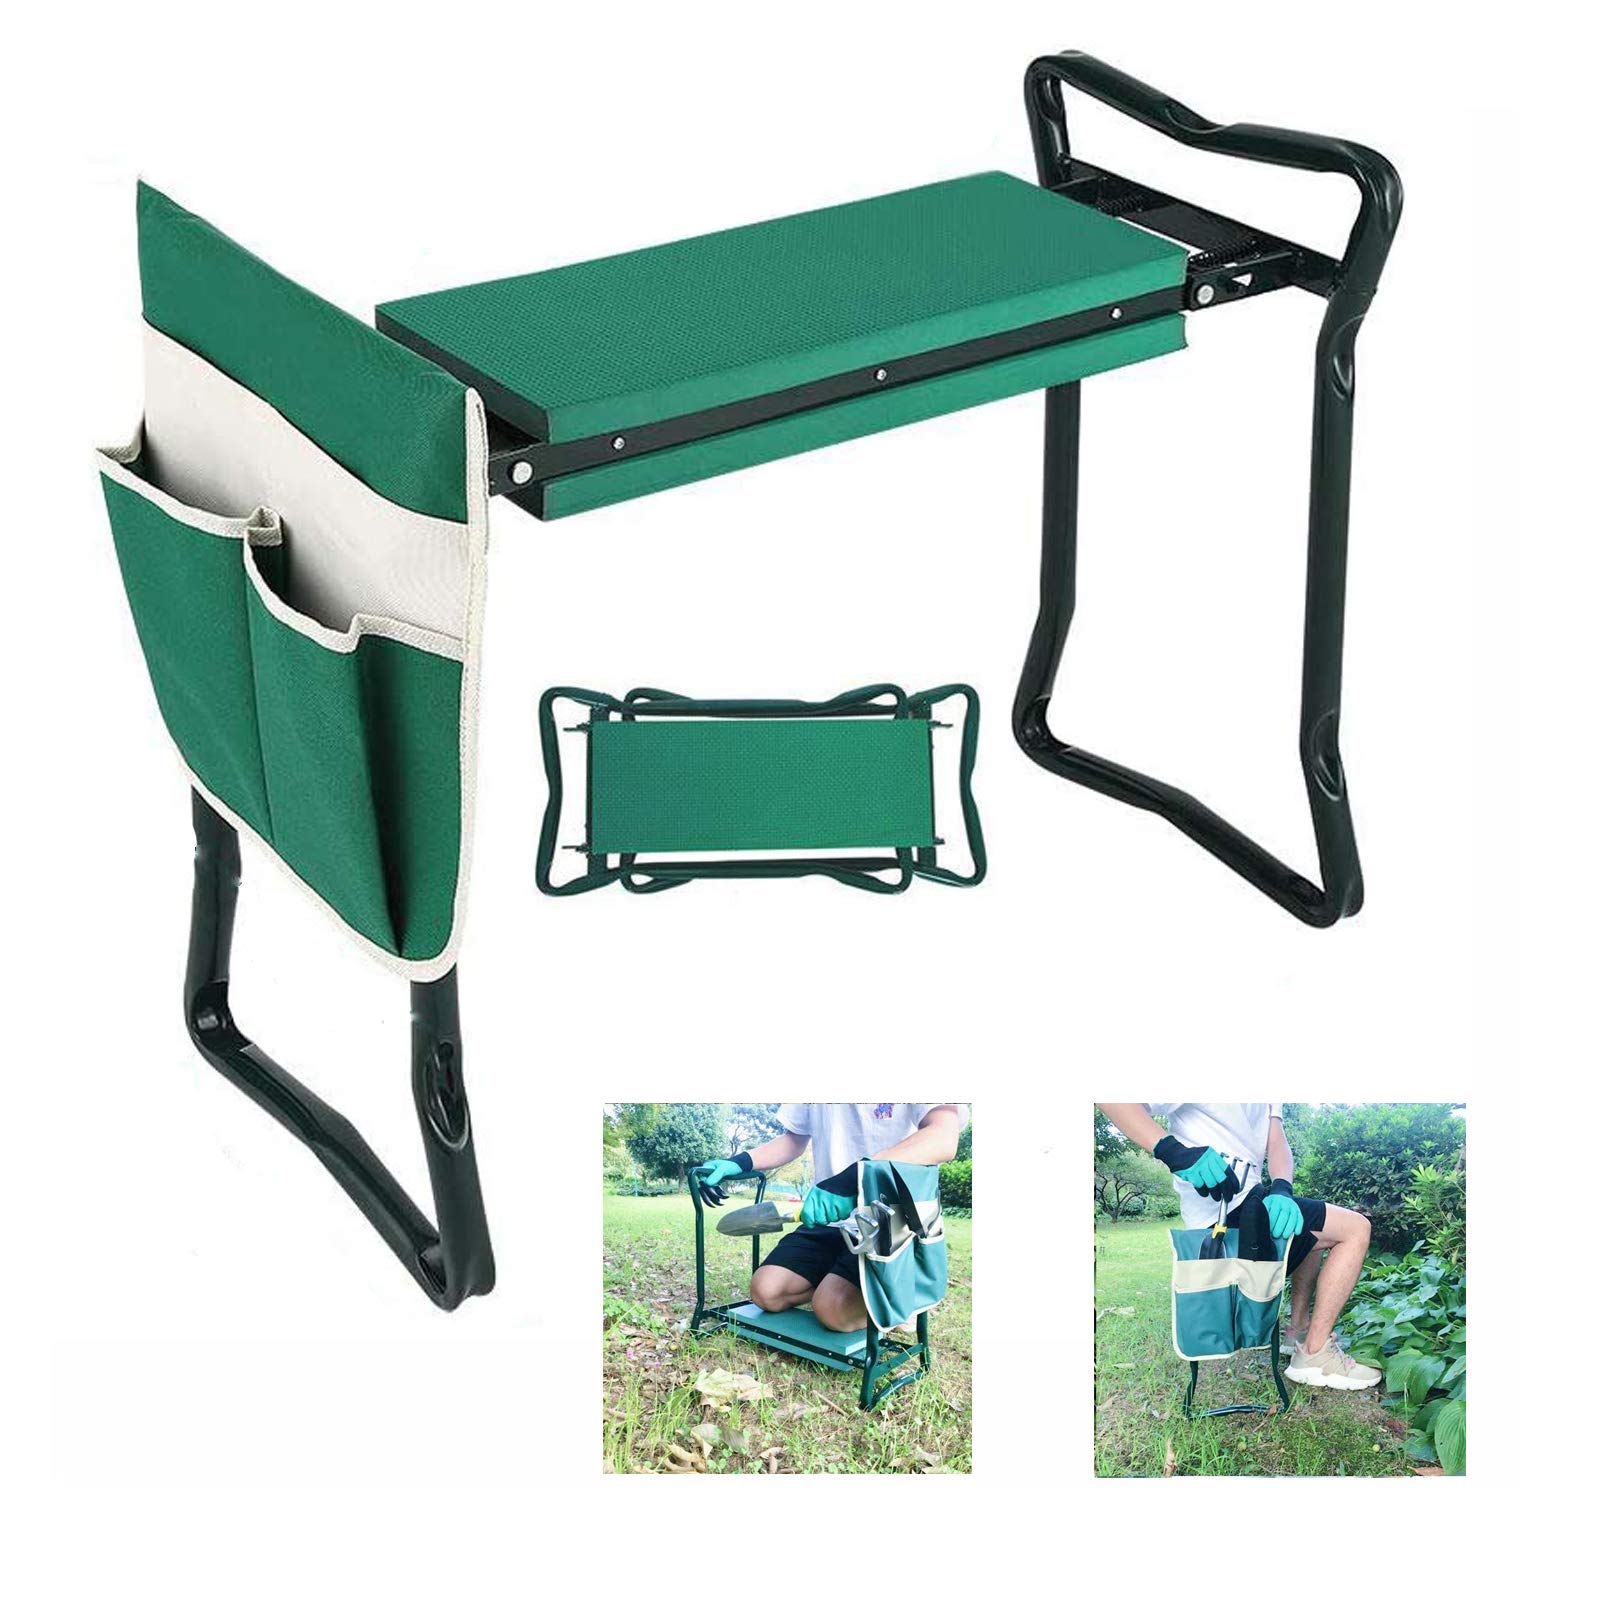 BESTHLS Garden Kneeler and Seat - Heavy Duty Folding Stool for Gardening, Protects Knees and Back, Supports up to 330 lbs - Grea